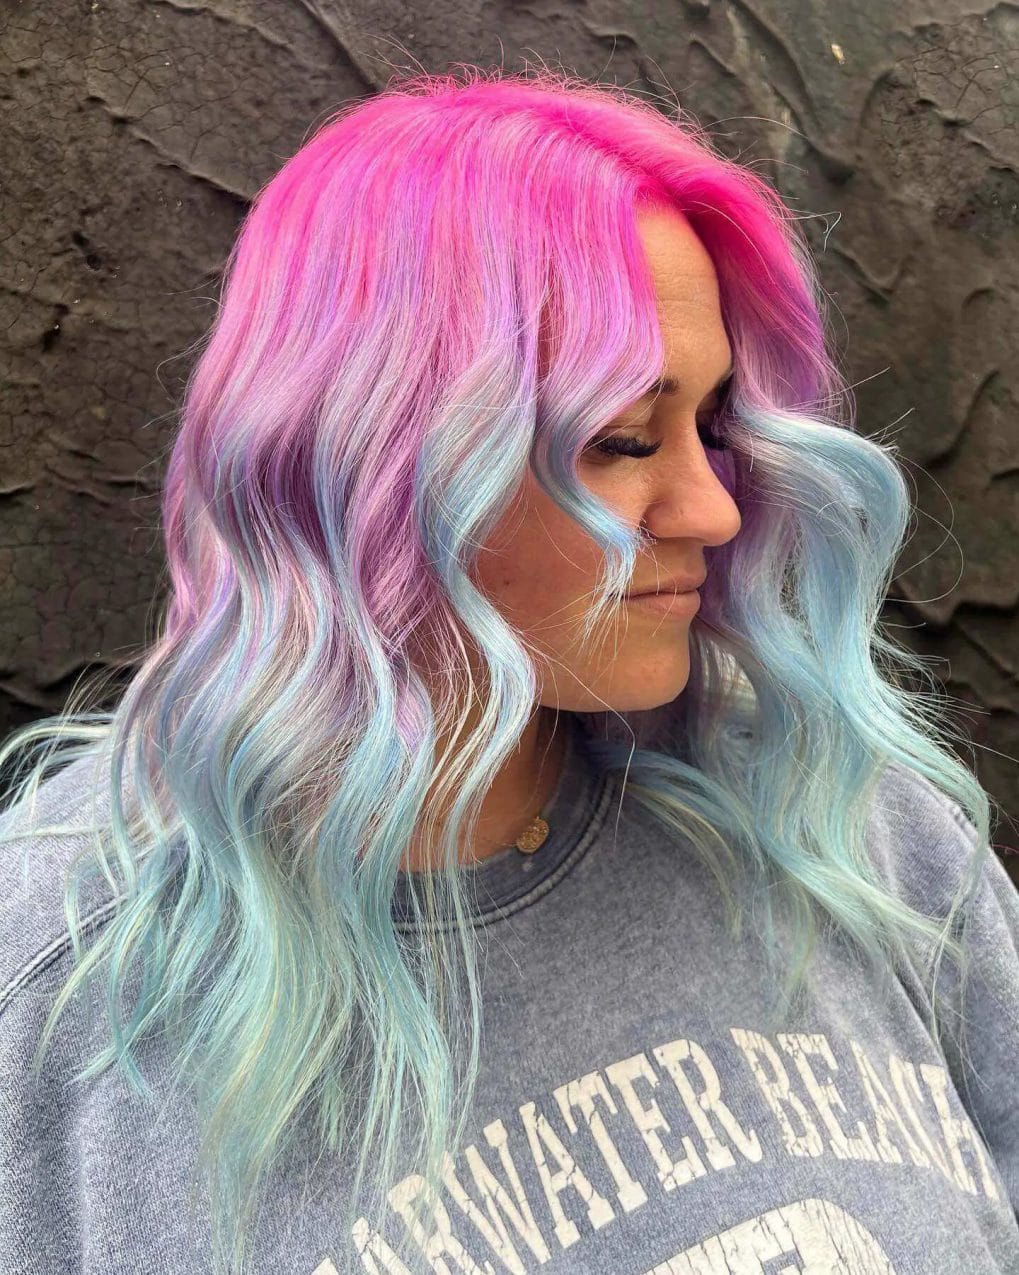 Bubblegum pink to pastel lilac and baby blue dreamy cotton candy hair.